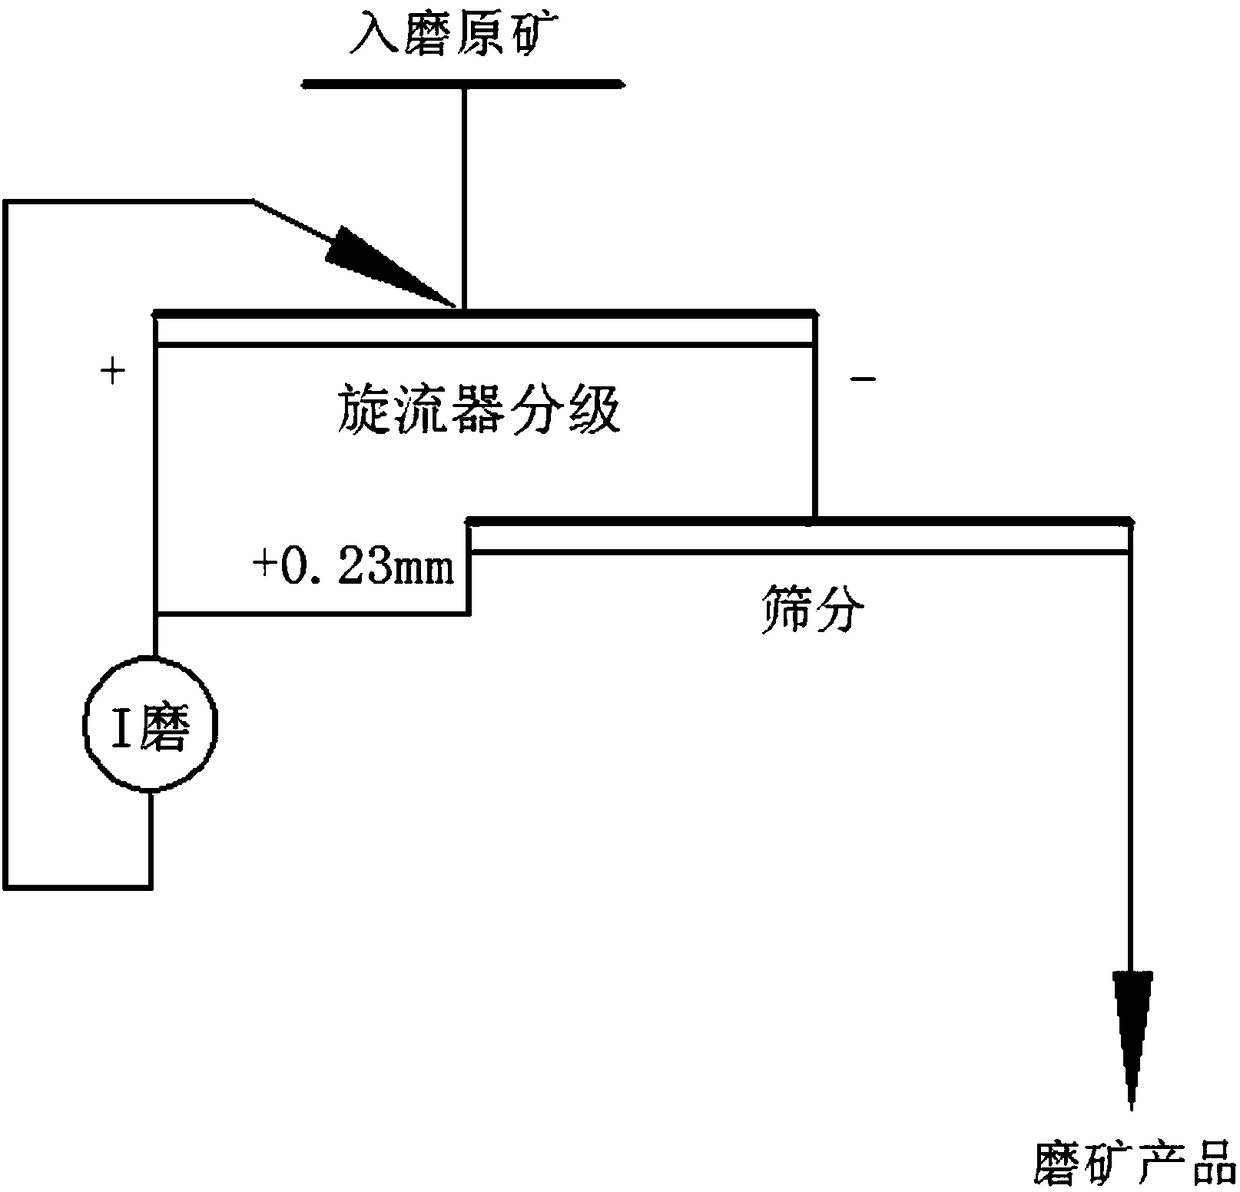 Closed circuit grinding method by adopting unified classification mode